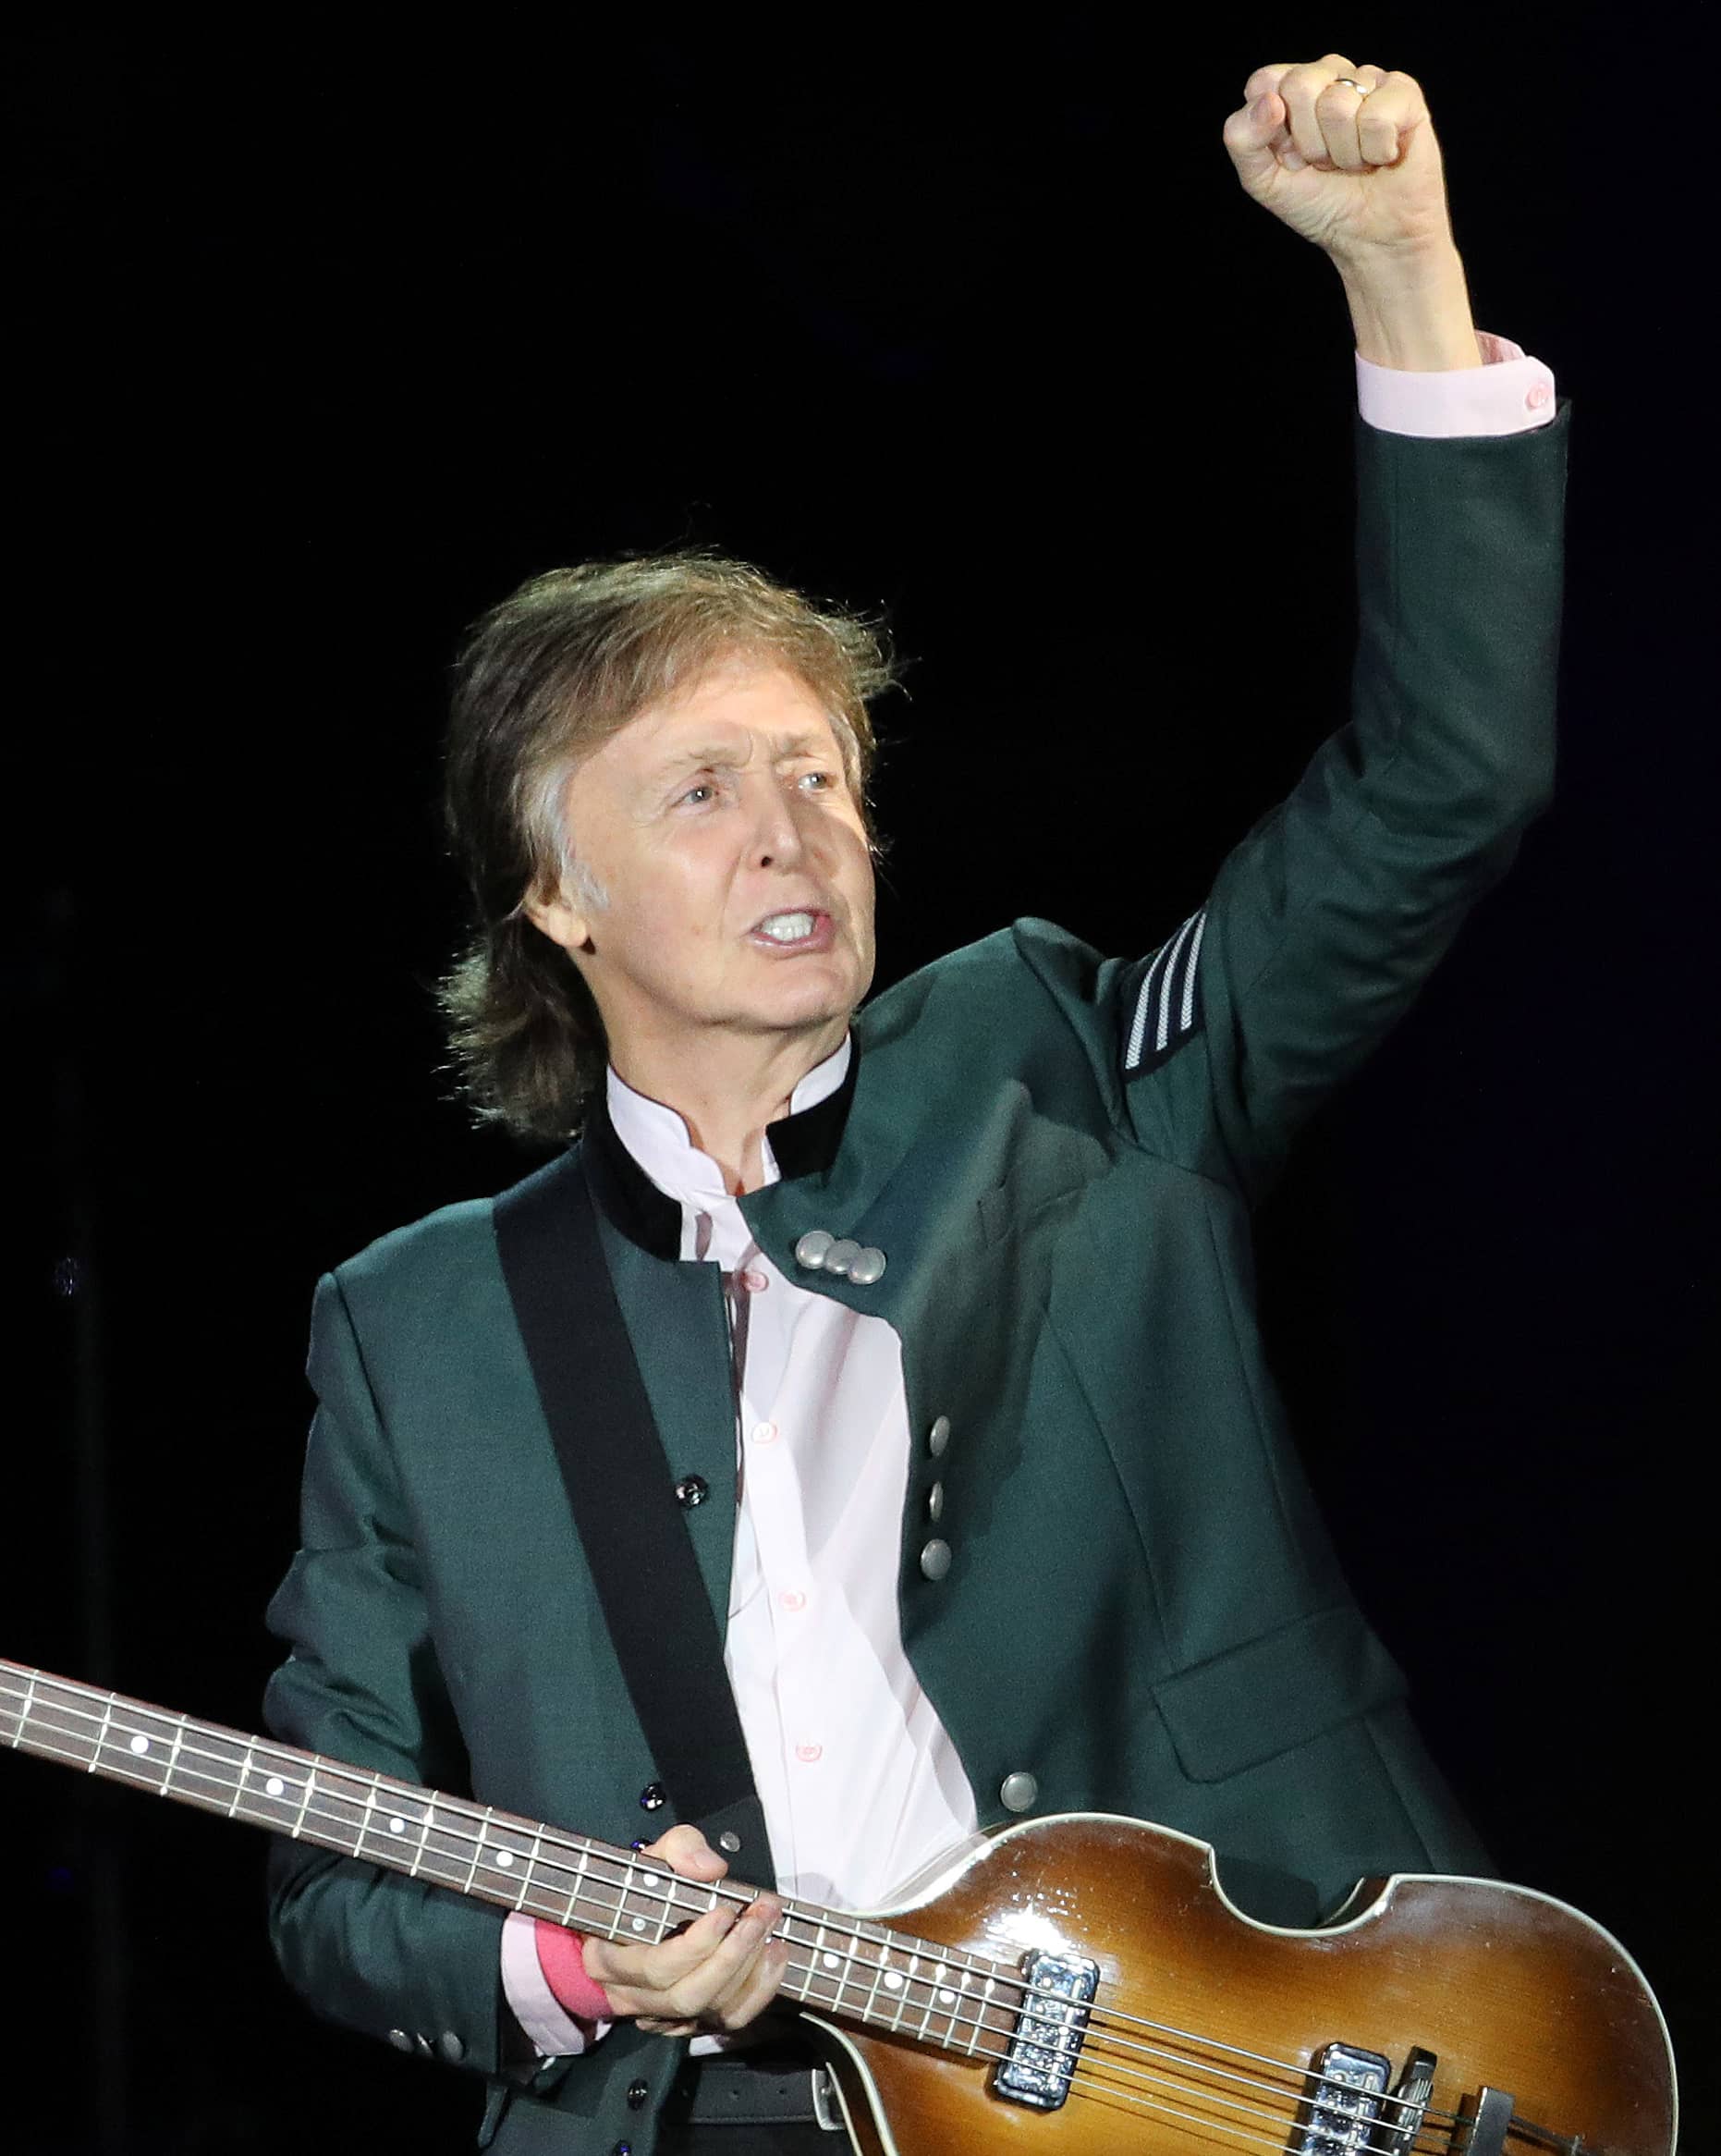 paul-mccartney-performs-during-the-one-on-one-tour-concert-in-porto-alegre-16